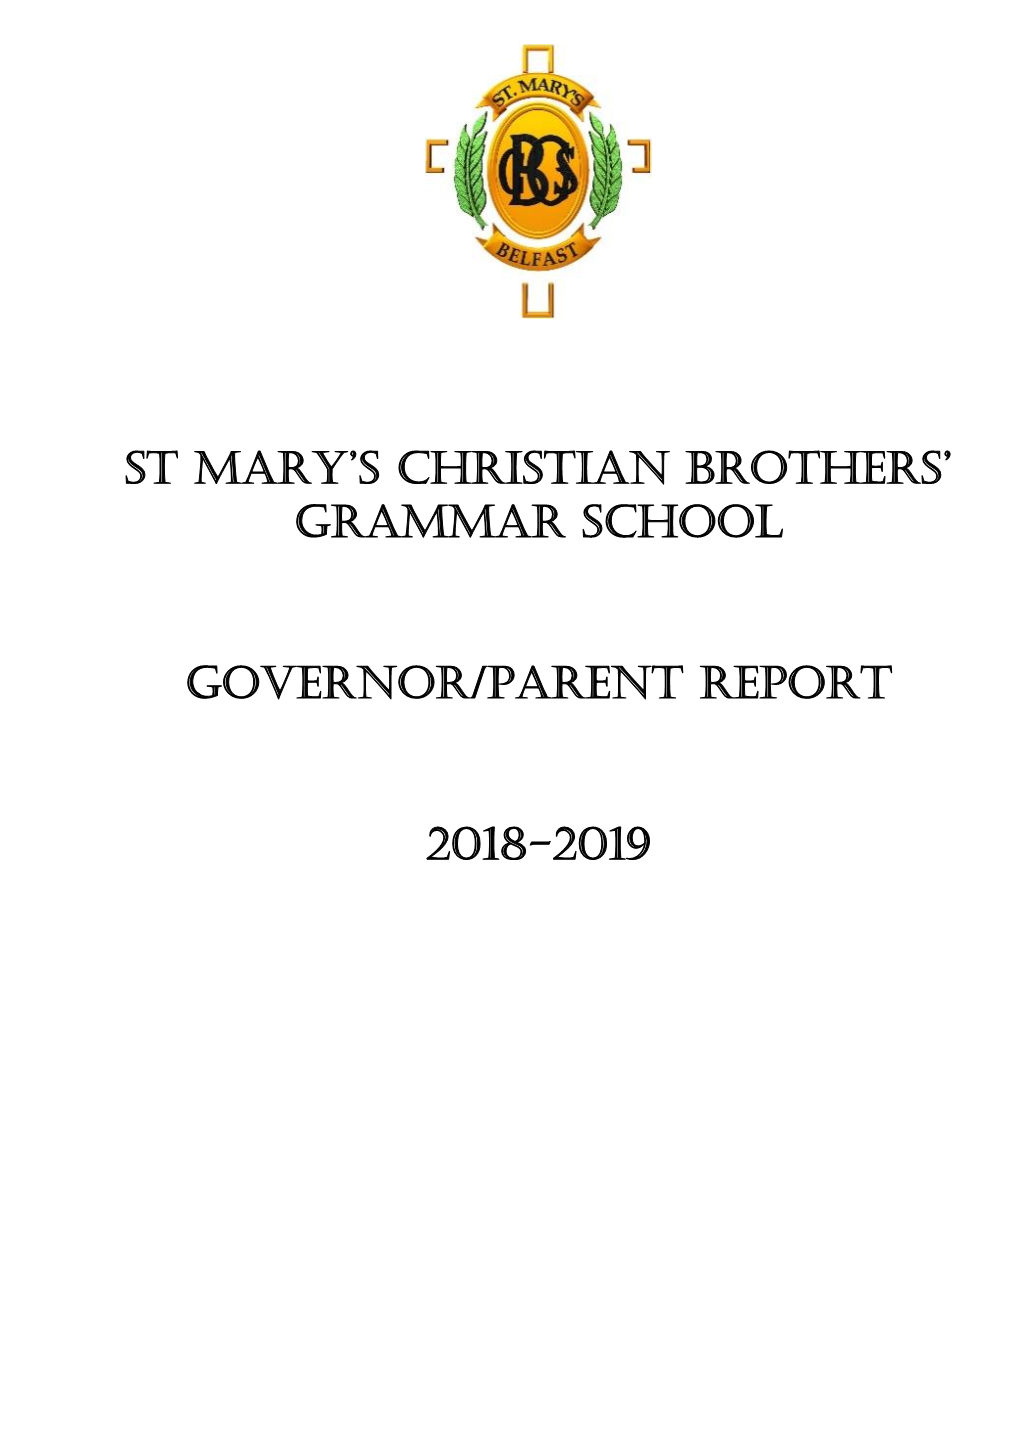 St Mary's Christian Brothers' Grammar School GOVERNOR